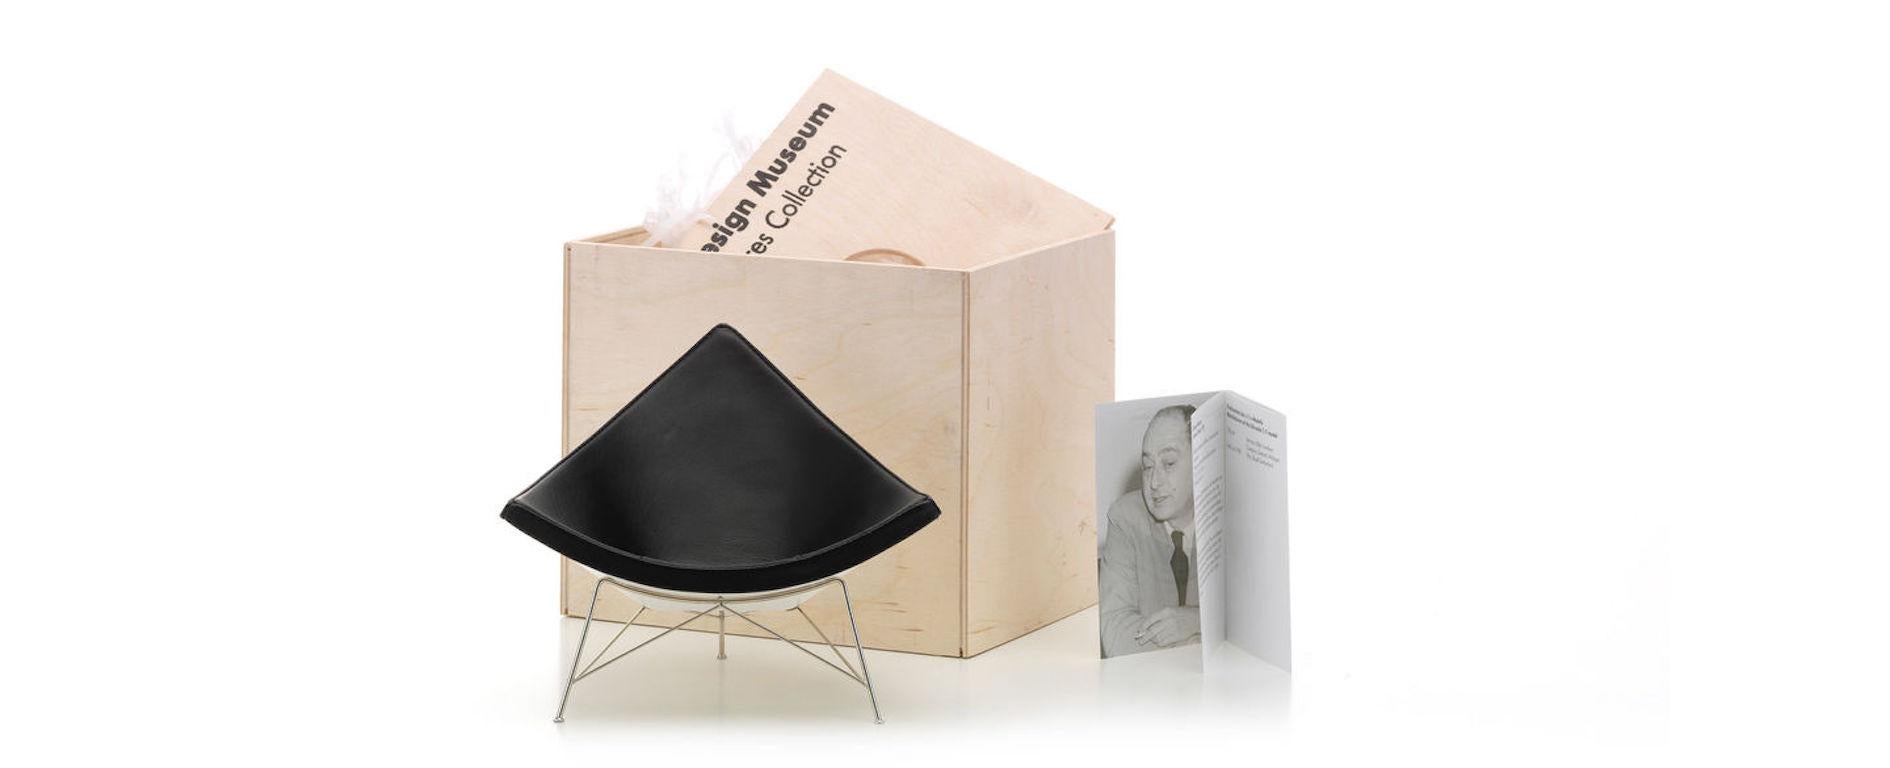 These items are currently only available in the United States.

For over two decades, the Vitra Design Museum has been making miniature replicas of milestones in furniture design from its collection. The Miniatures Collection encapsulates the entire